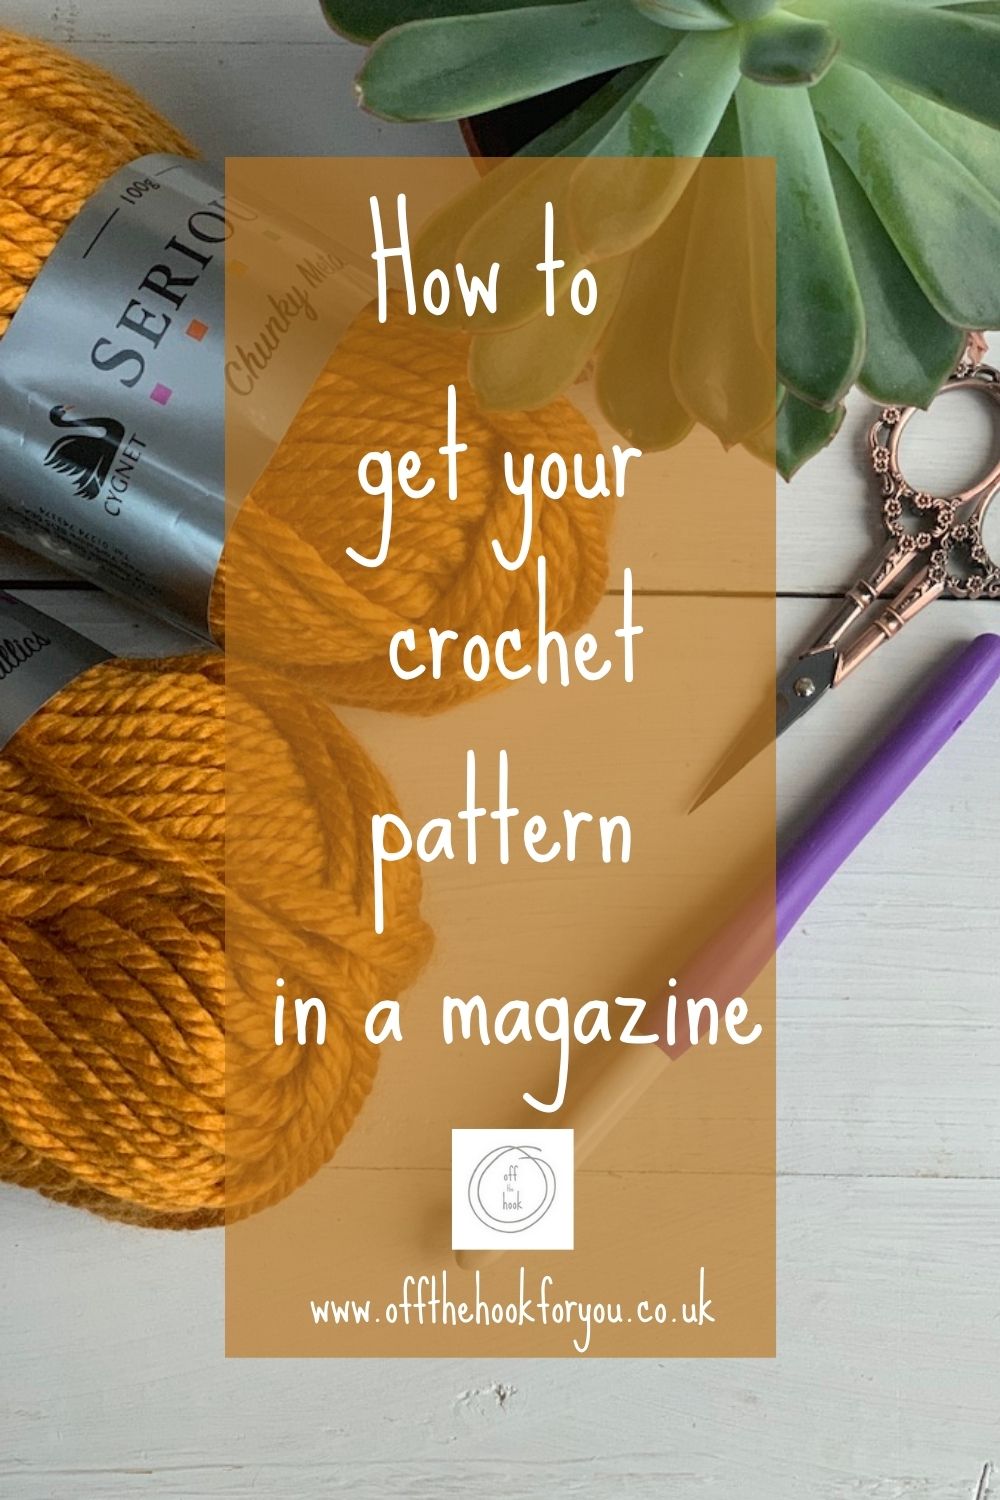 How to be a crochet designer